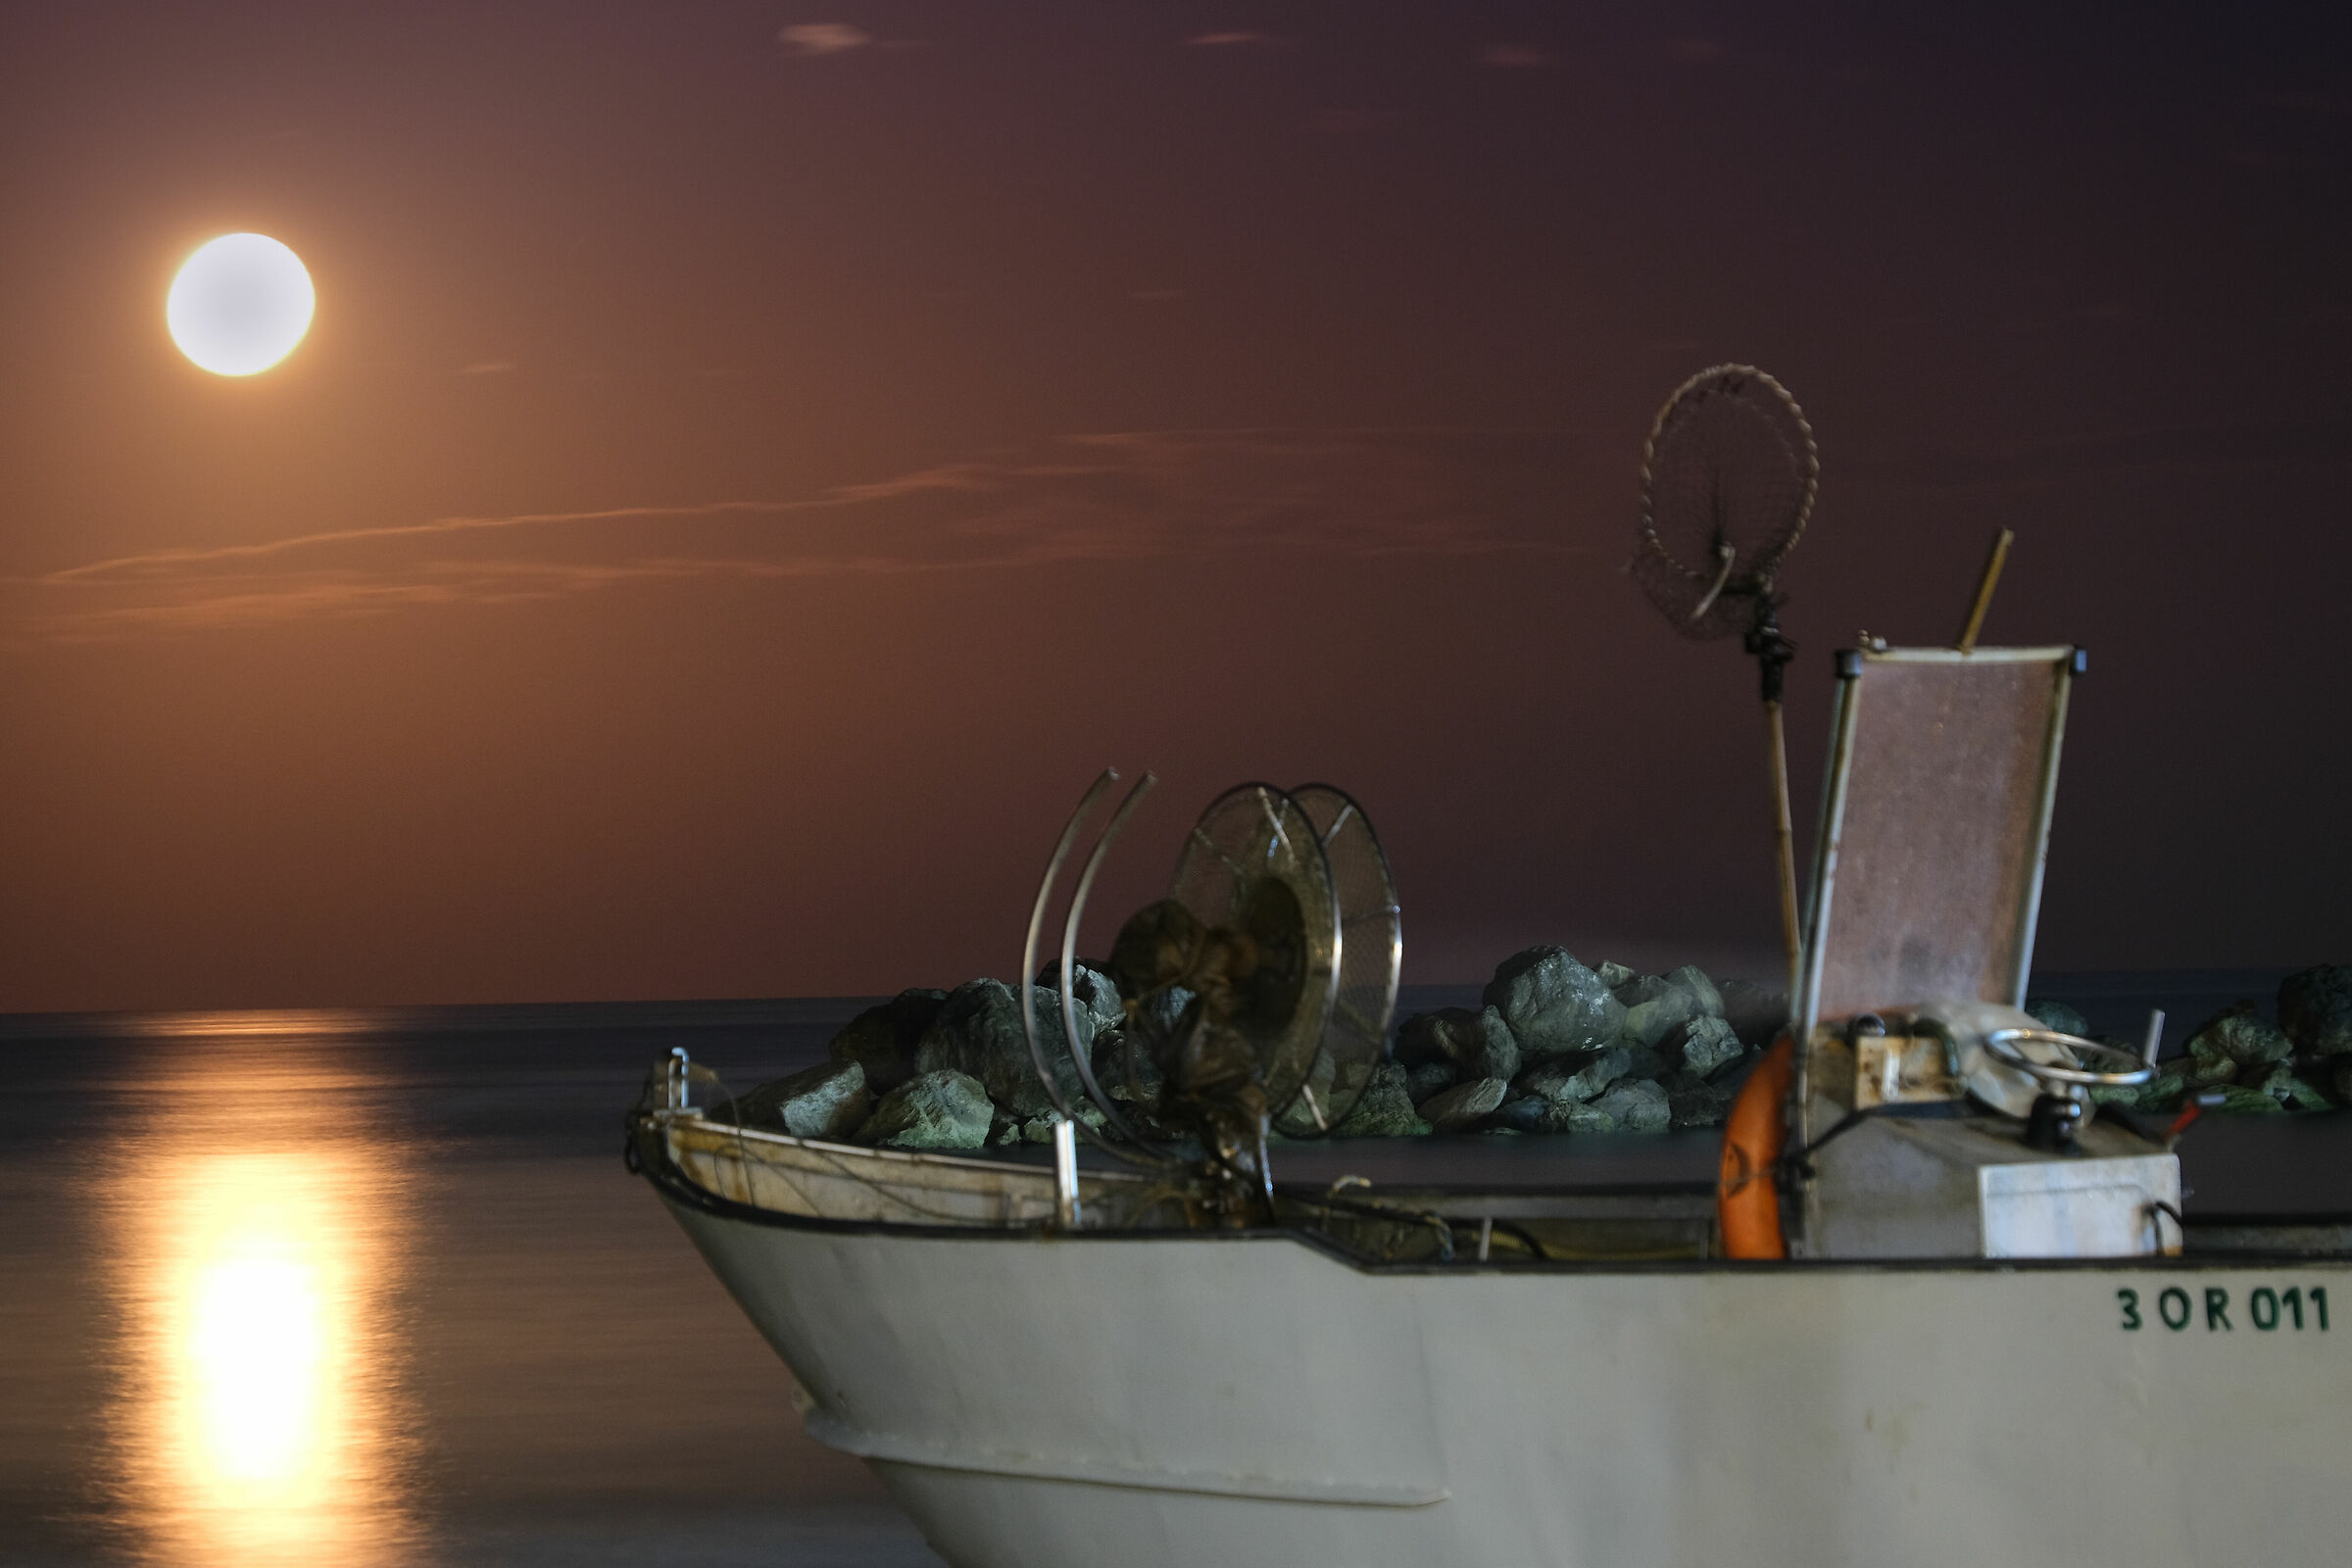 the boat and the moon...